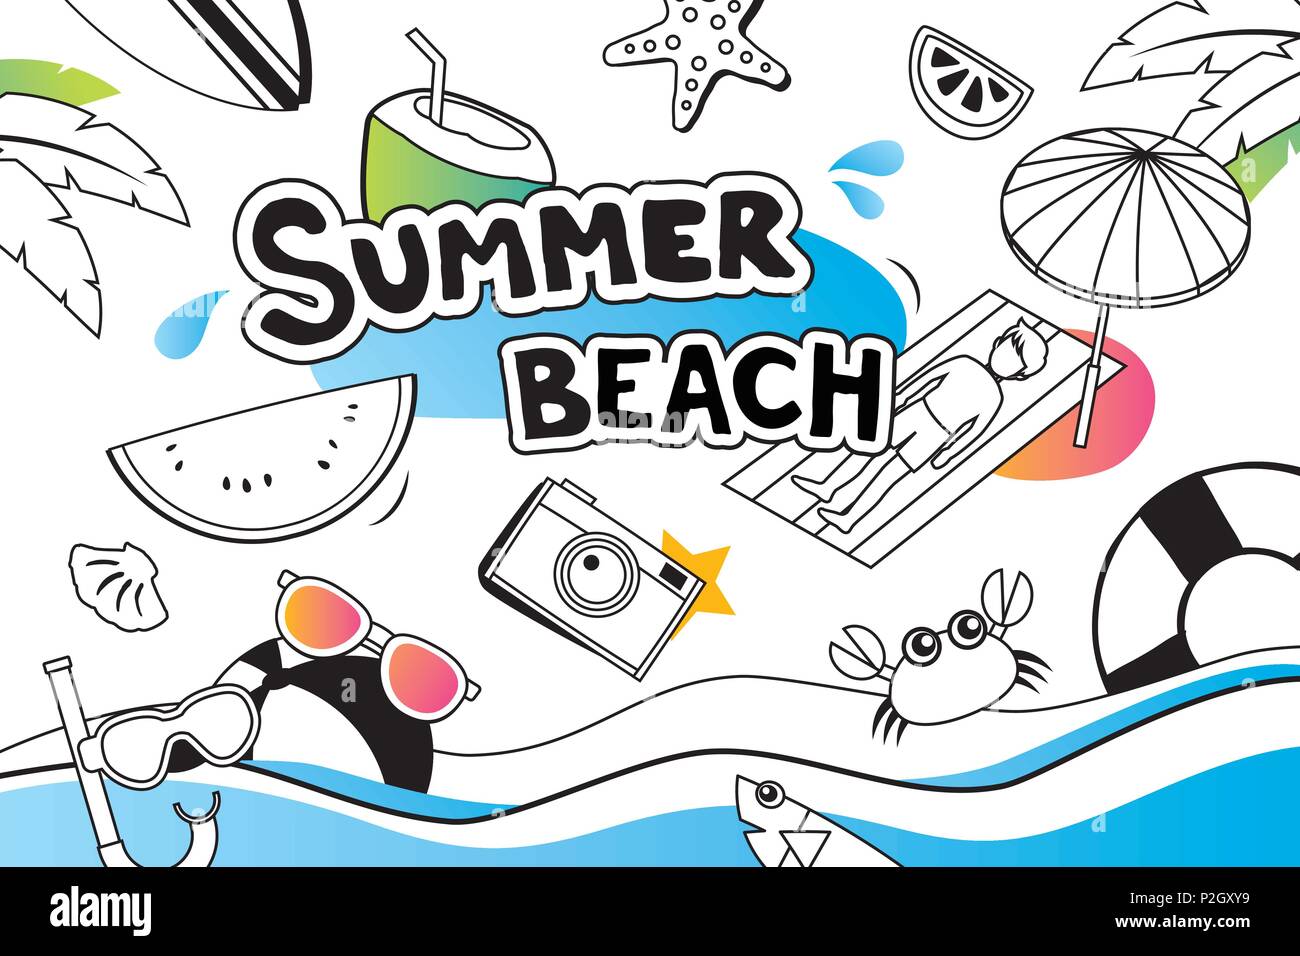 Summer doodle symbol and objects icon design for beach party background. Invitation hand drawn style. Use for labels, stickers, badges, poster, flyer, Stock Vector